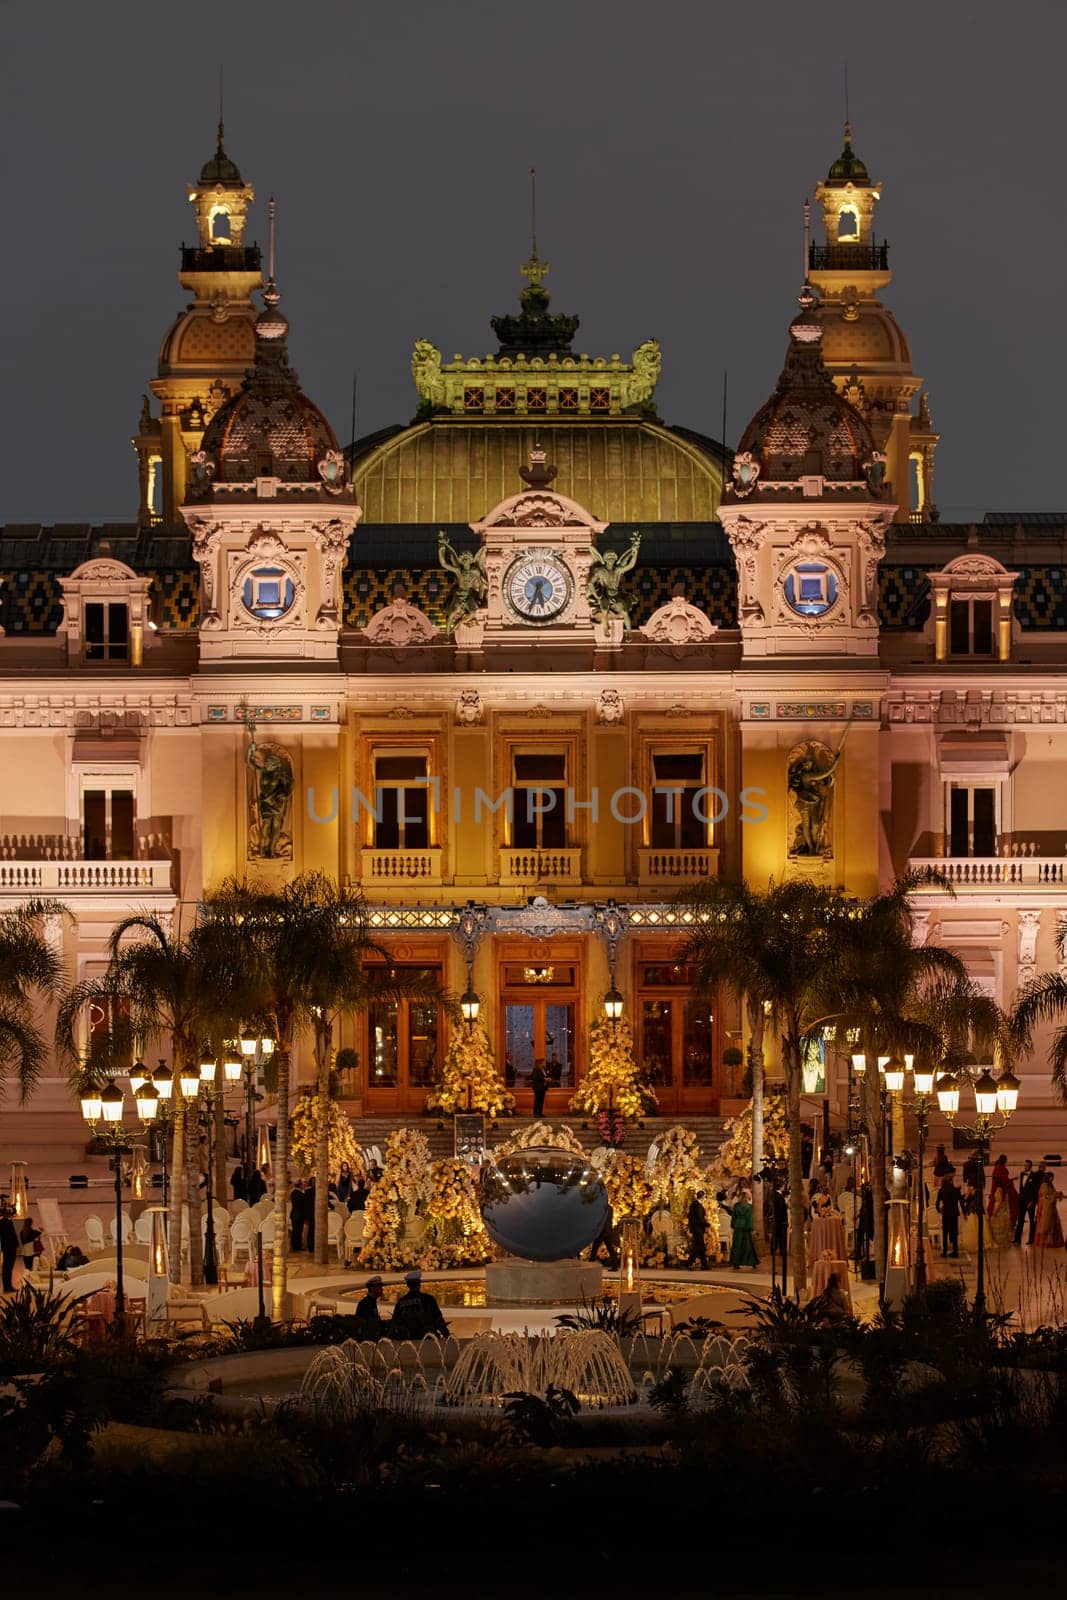 Monaco, Monte-Carlo, 12 November 2022: The famous square of Casino Monte-Carlo is at dusk, attraction night illumination, luxury cars, players, tourists, splashes of fountain. High quality photo